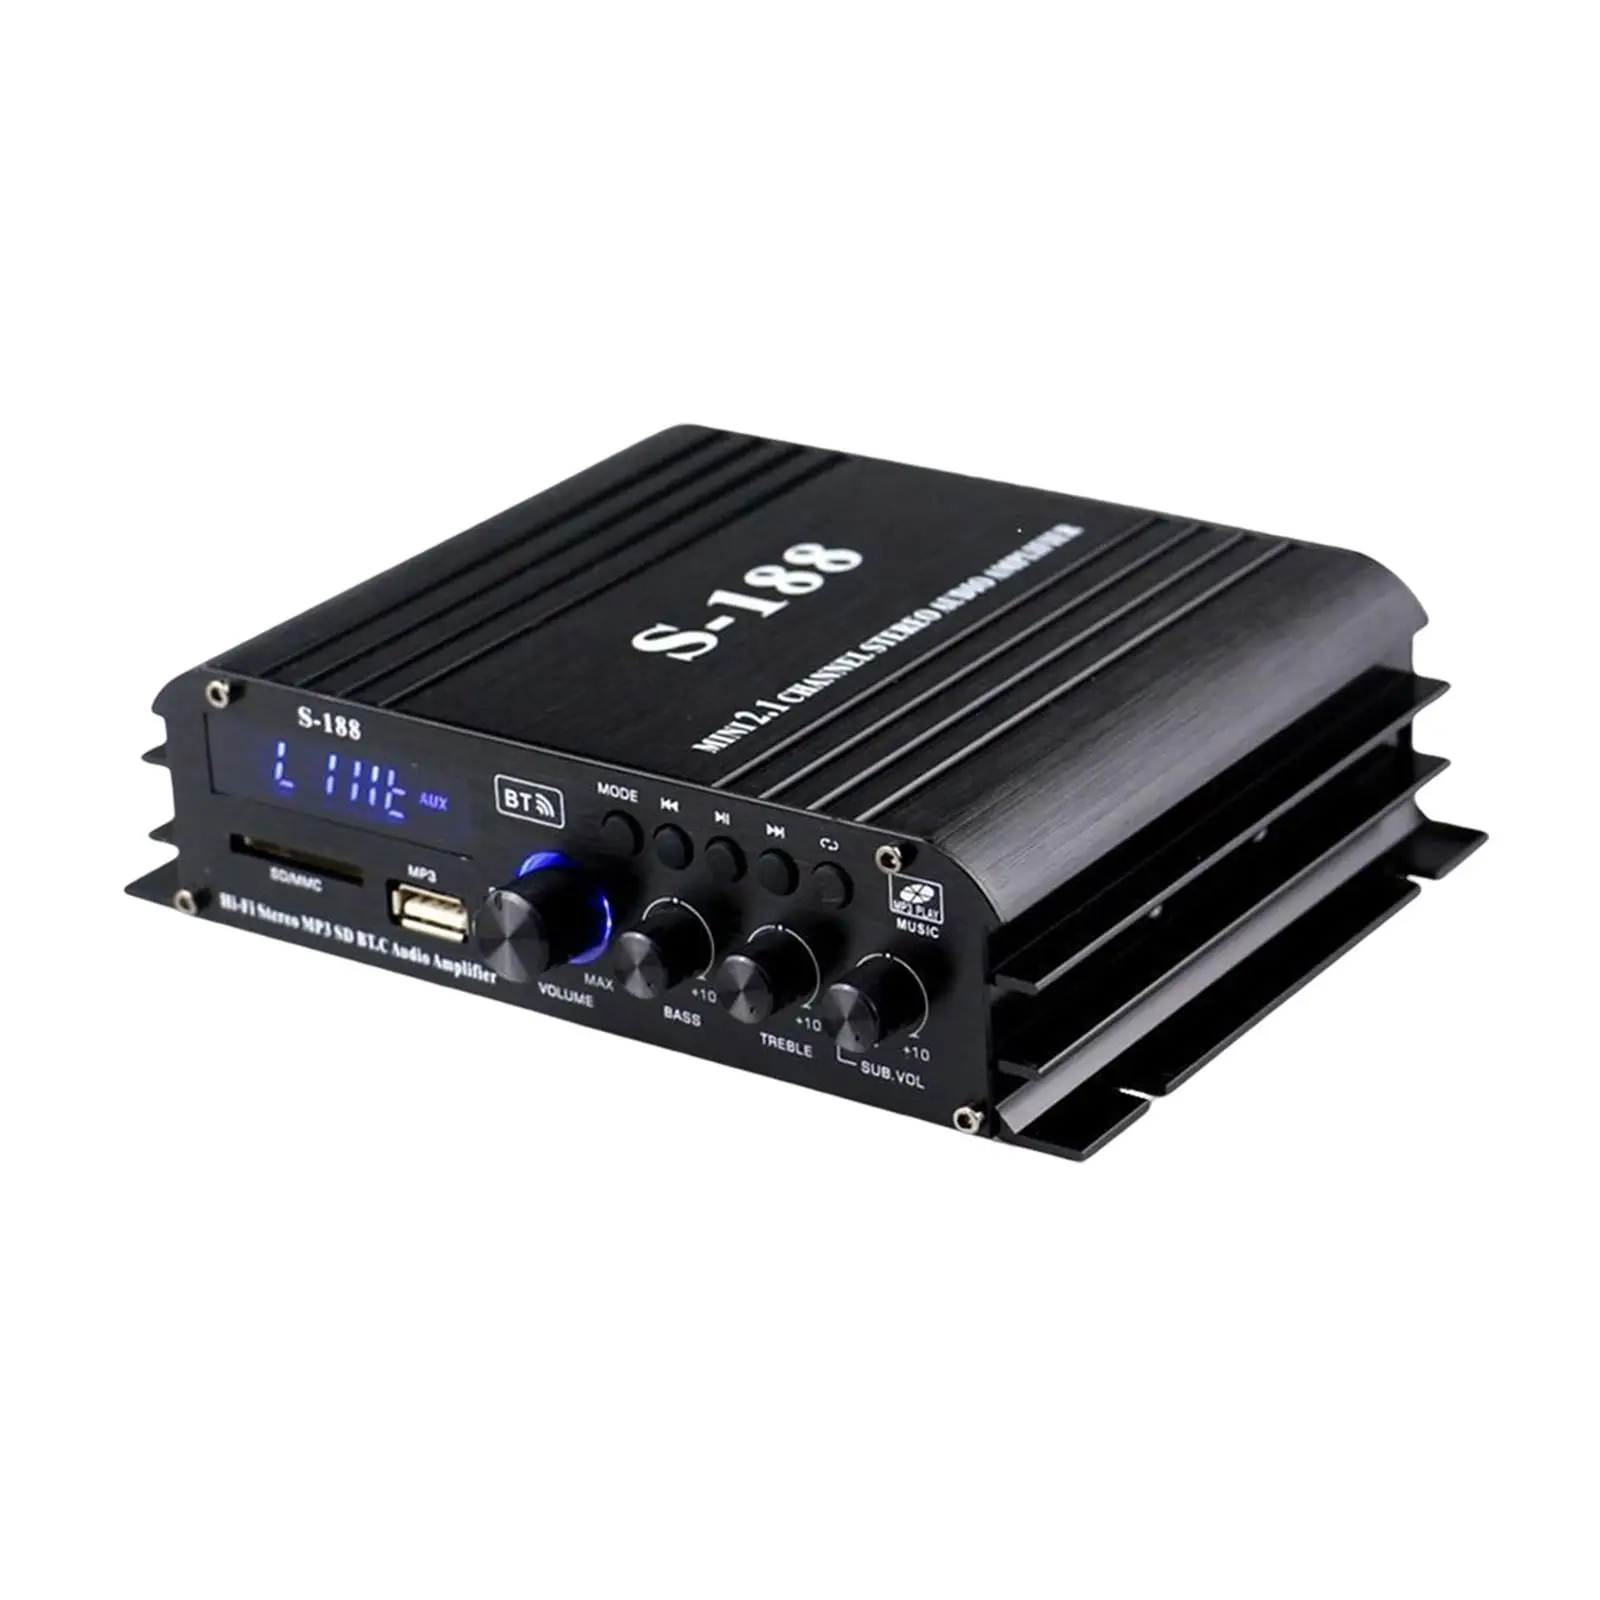 Wireless Power Amplifier 40wx2 Audio sub Bass Amp US Adapter Plug Sturdy Audio Amp Booster Amplifier with Knobs DC 12V-14V 2.1CH